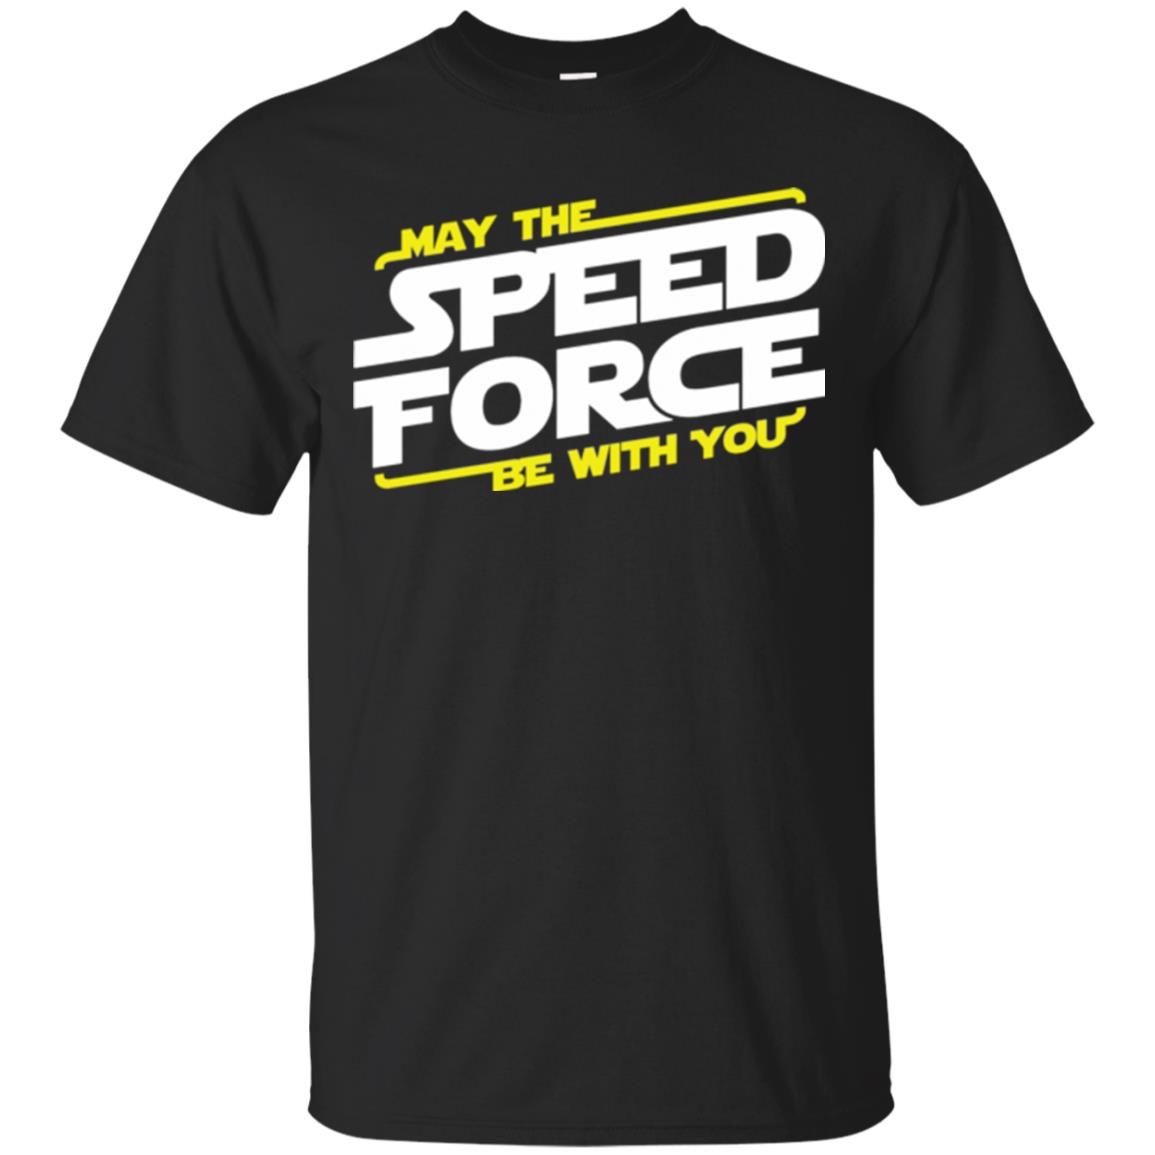 may the speed force be with you t shirt - black